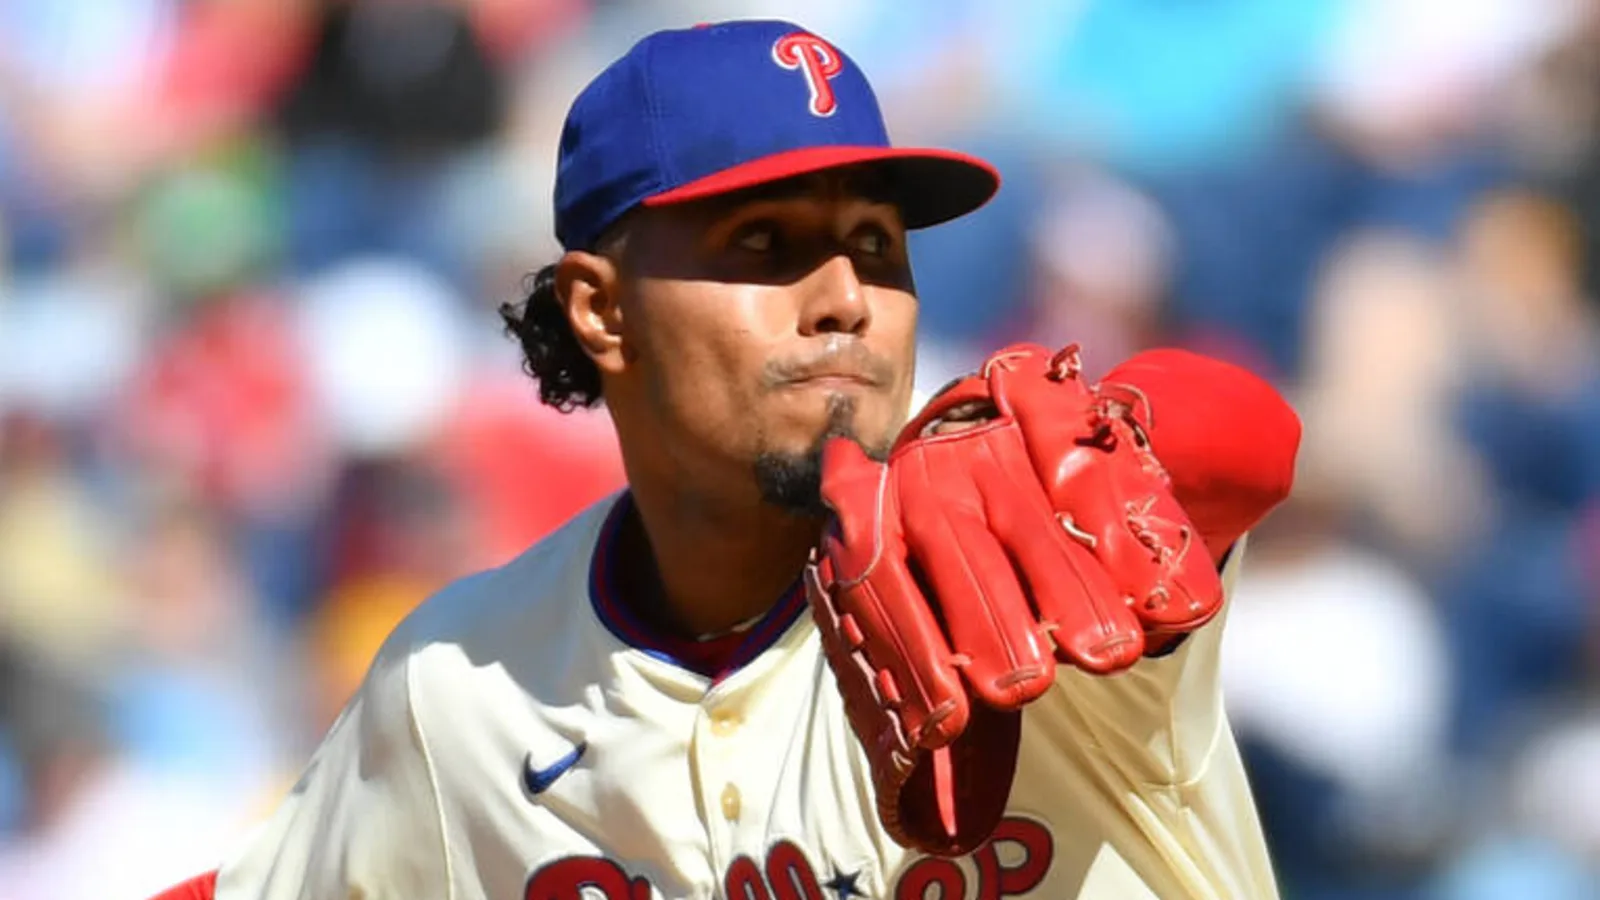 Yunior Marte and Ricardo Pinto, a right-hander, has returned to the Phillies…